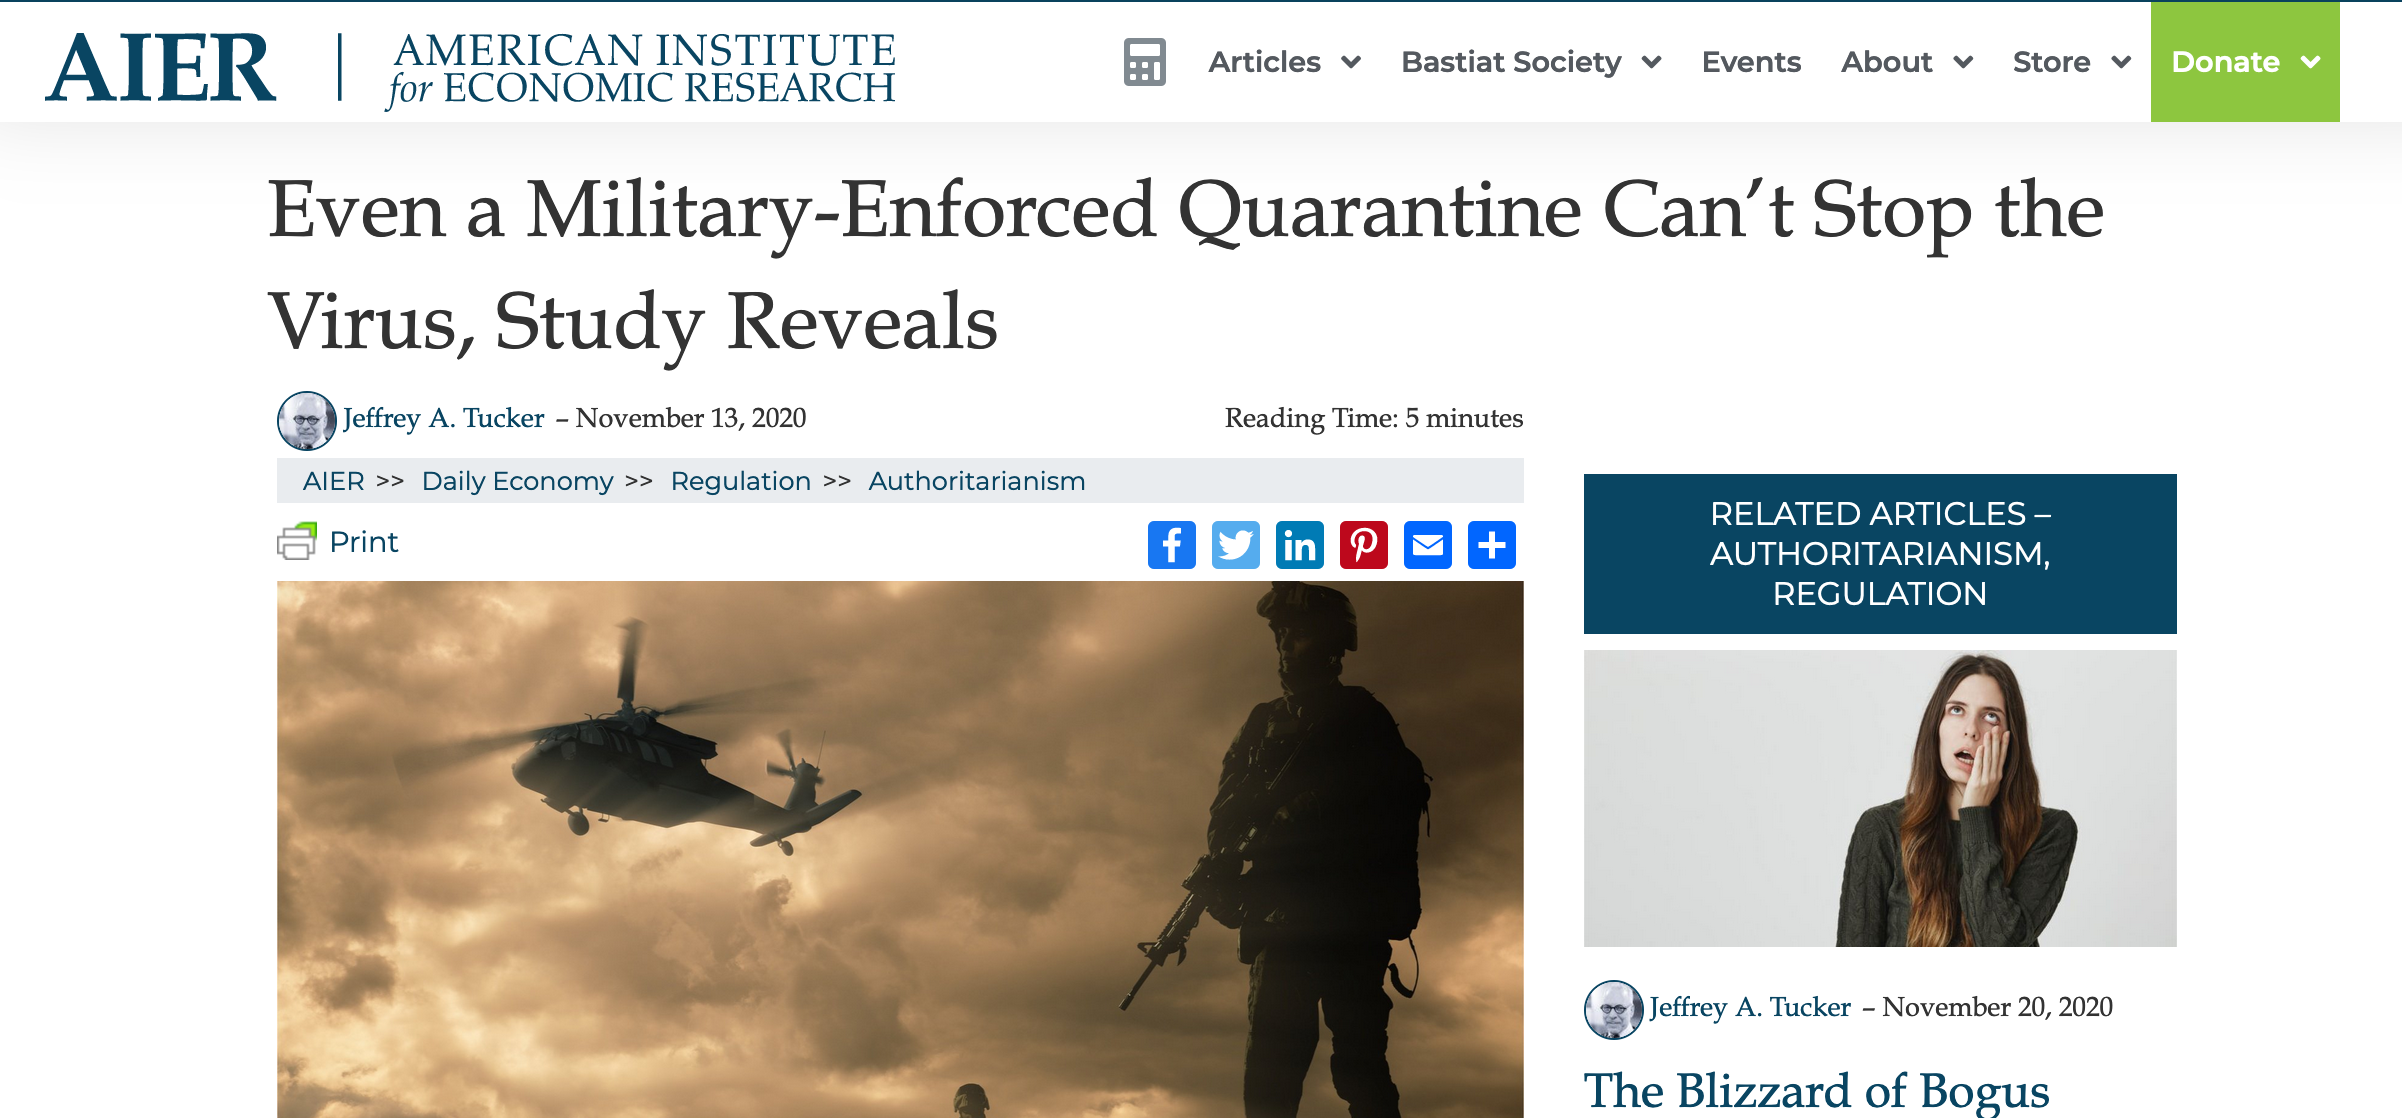 Even a Military-Enforced Quarantine Can’t Stop the Virus, Study Reveals